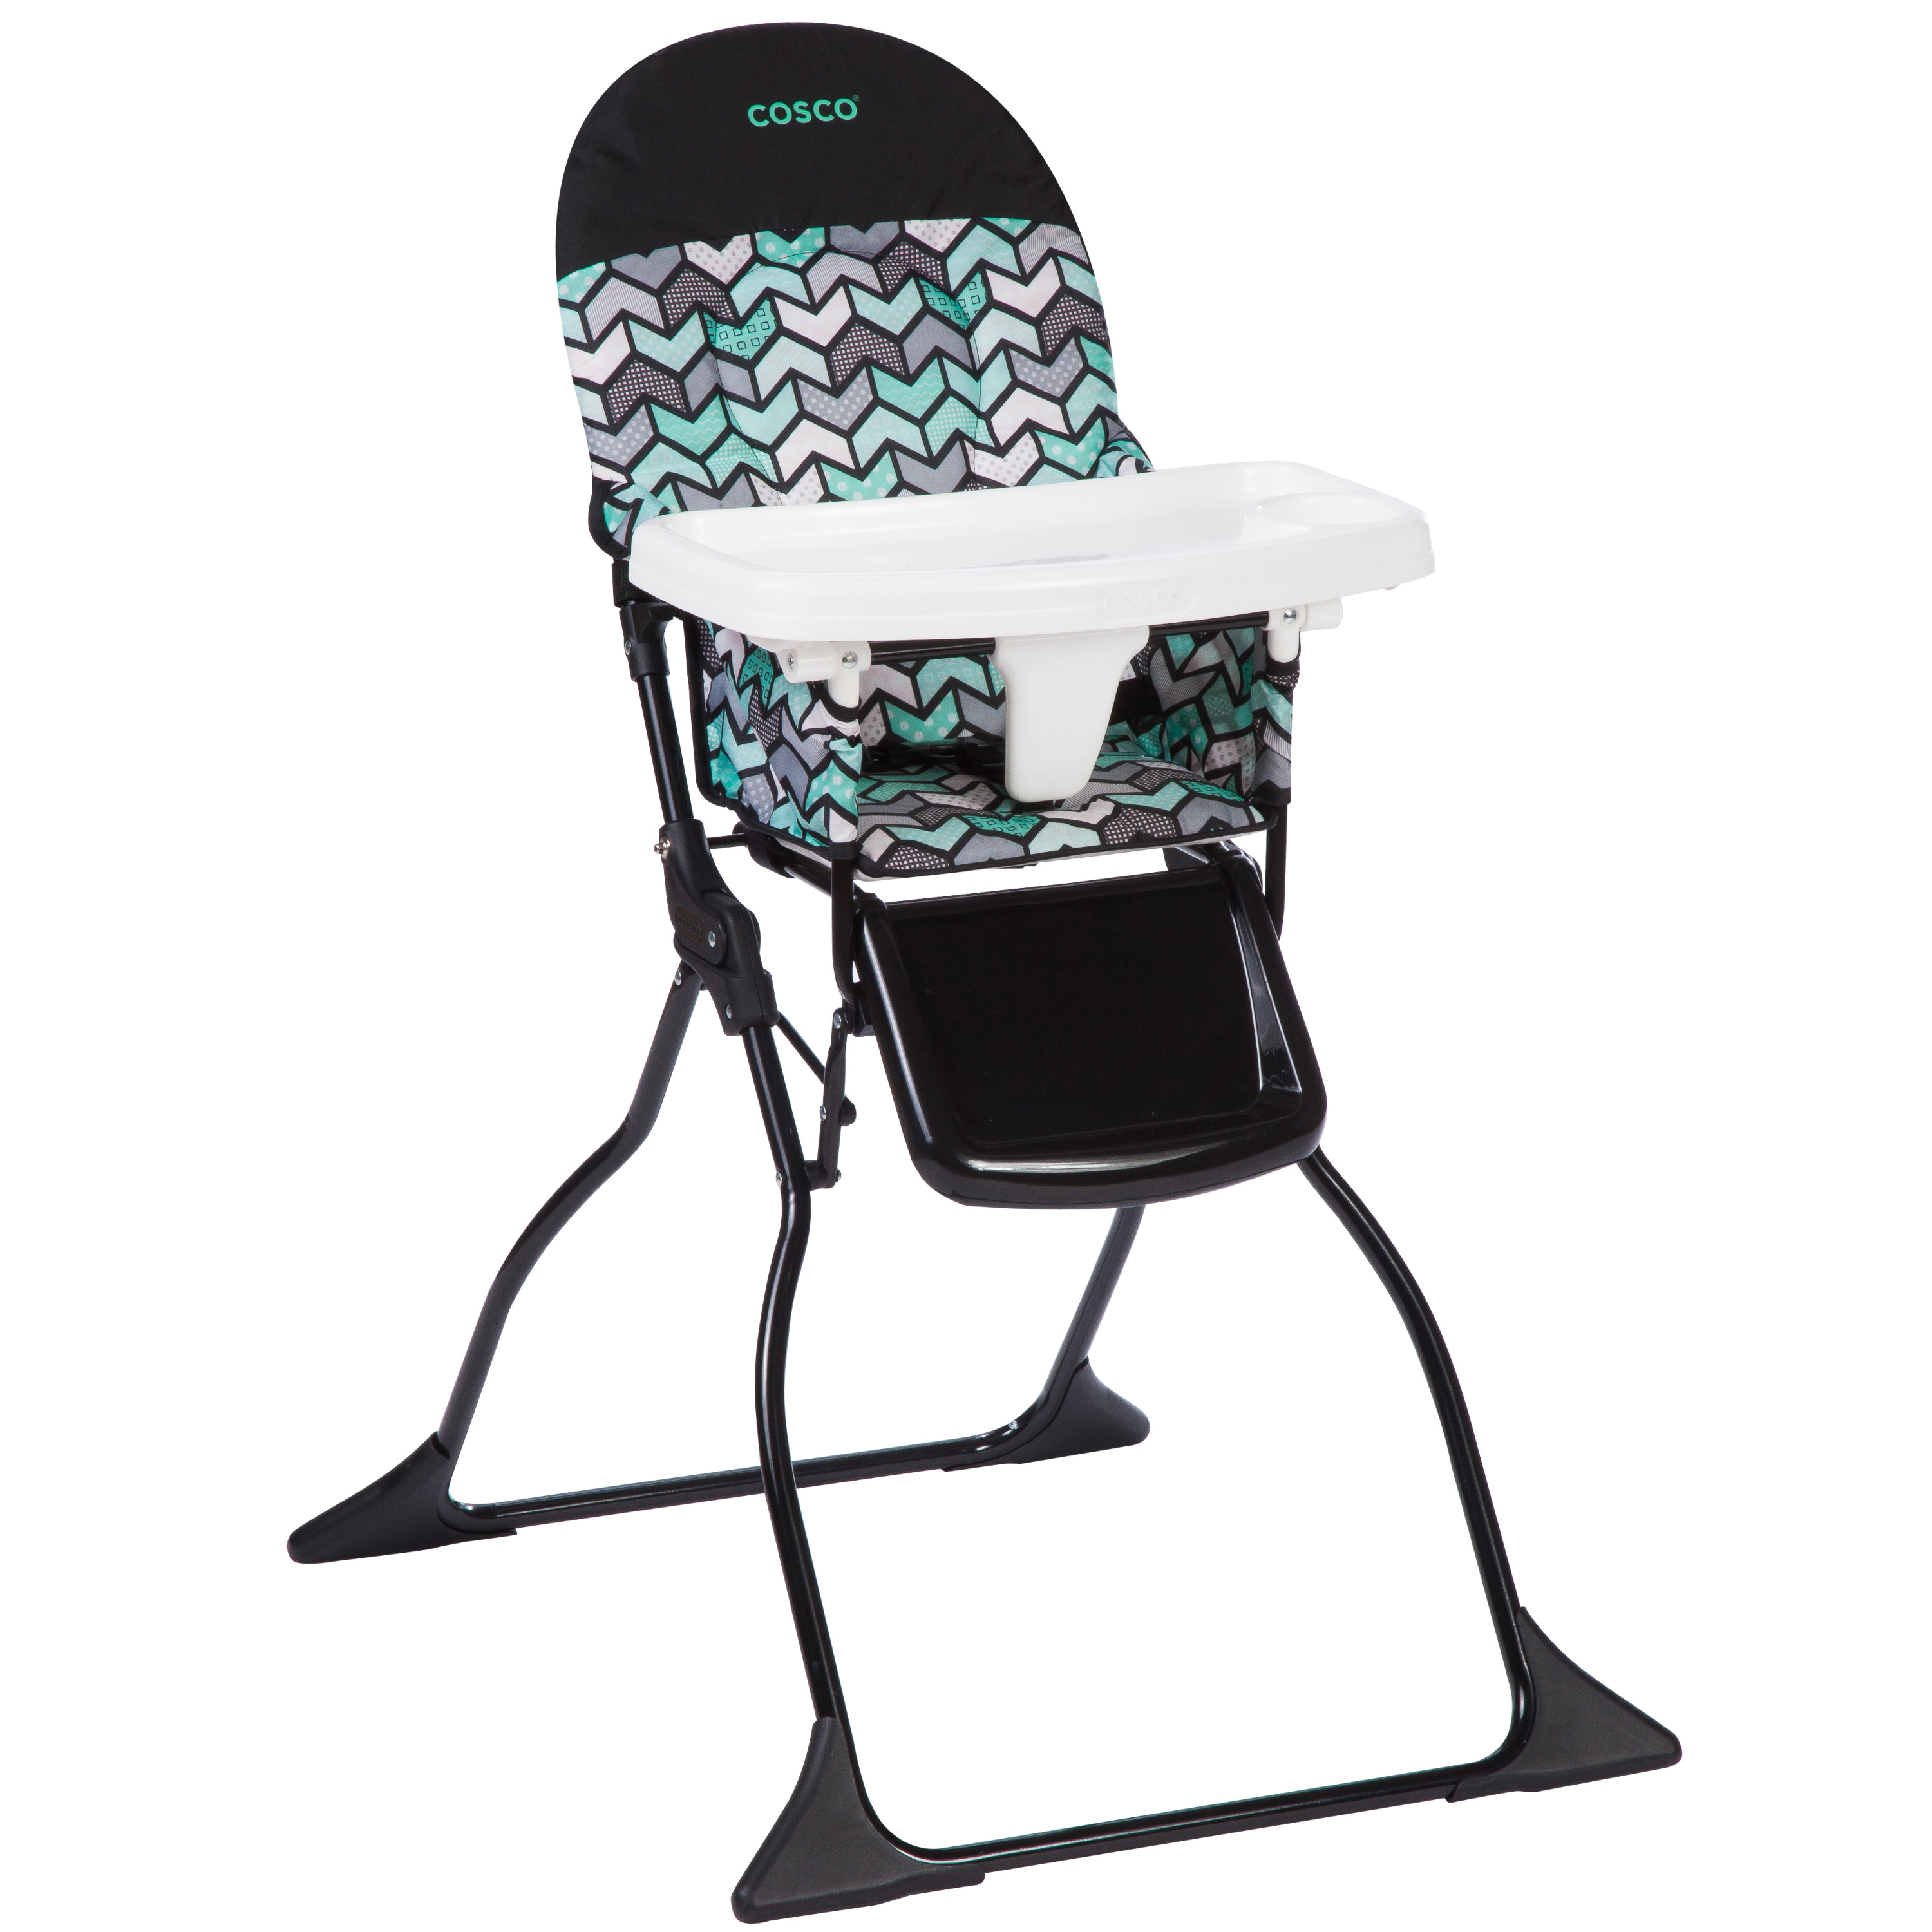 Cosco Kids Simple Fold Full Size High Chair with Adjustable Tray, Spritz - image 5 of 13